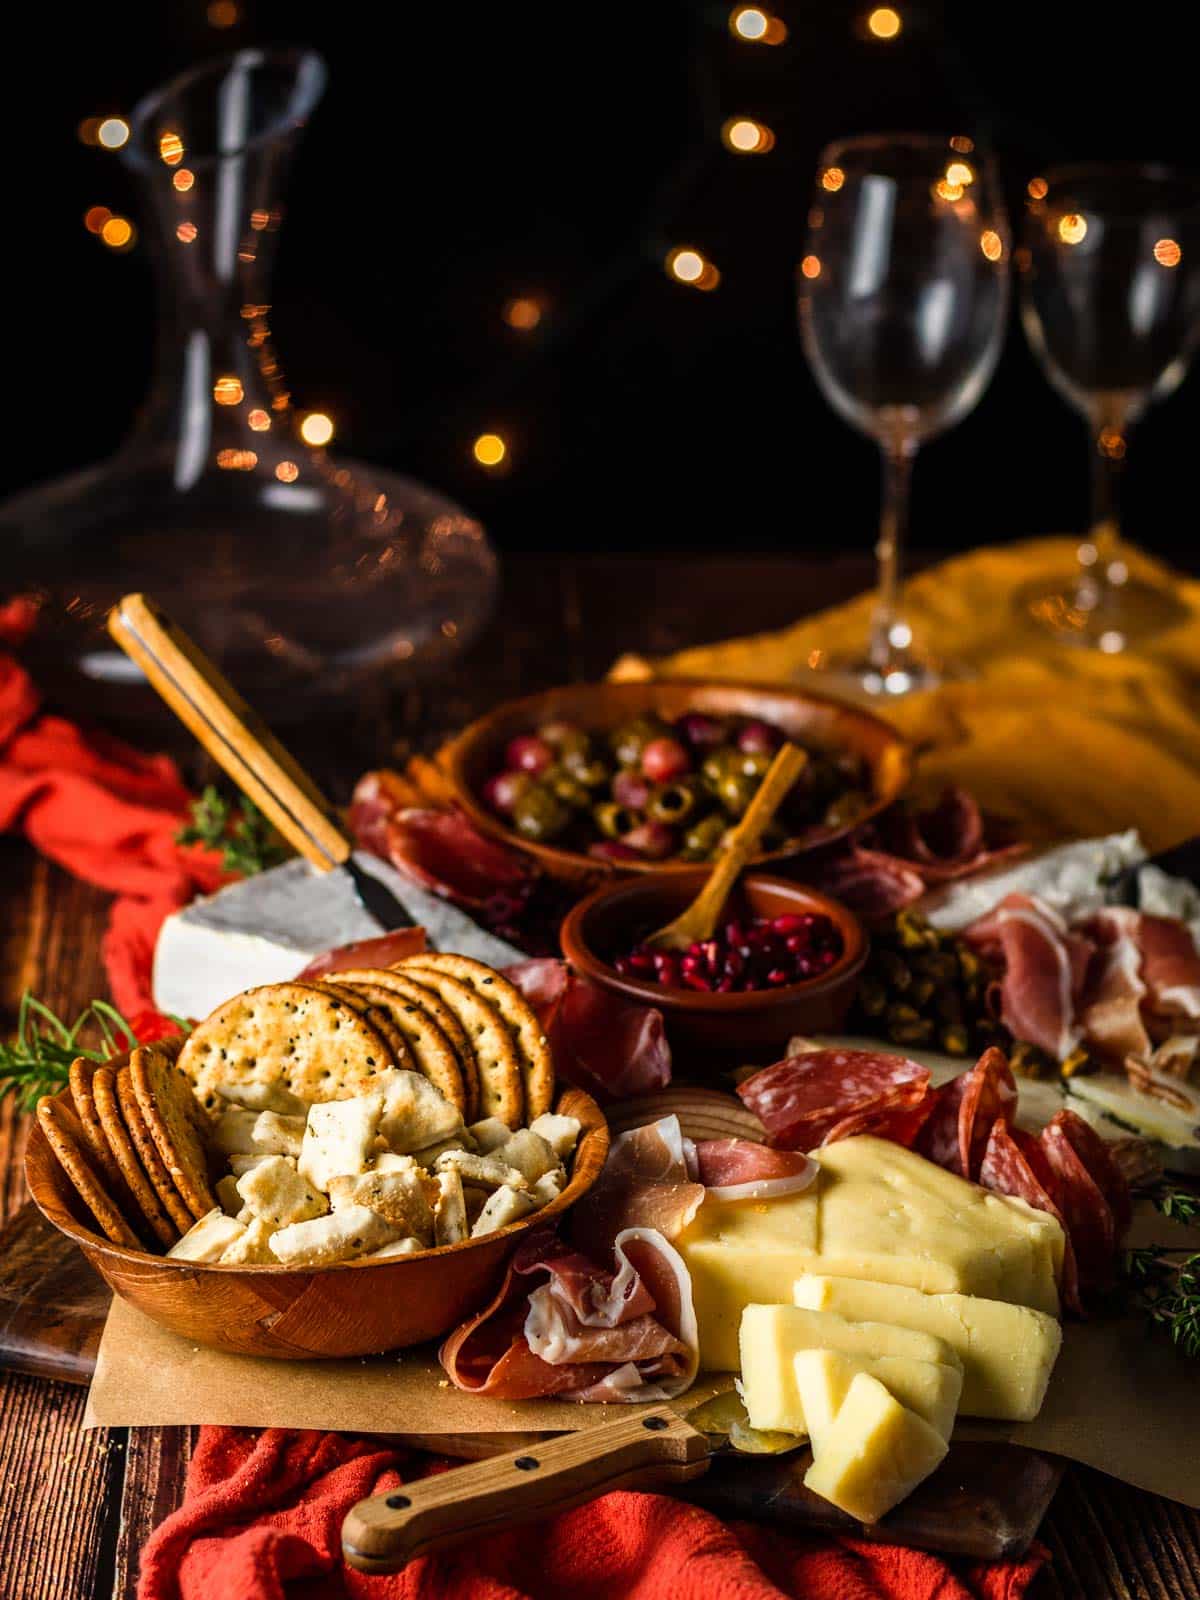 charcuterie board with meat, cheese and crackers with wine decanter, lights and wine glasses in the background